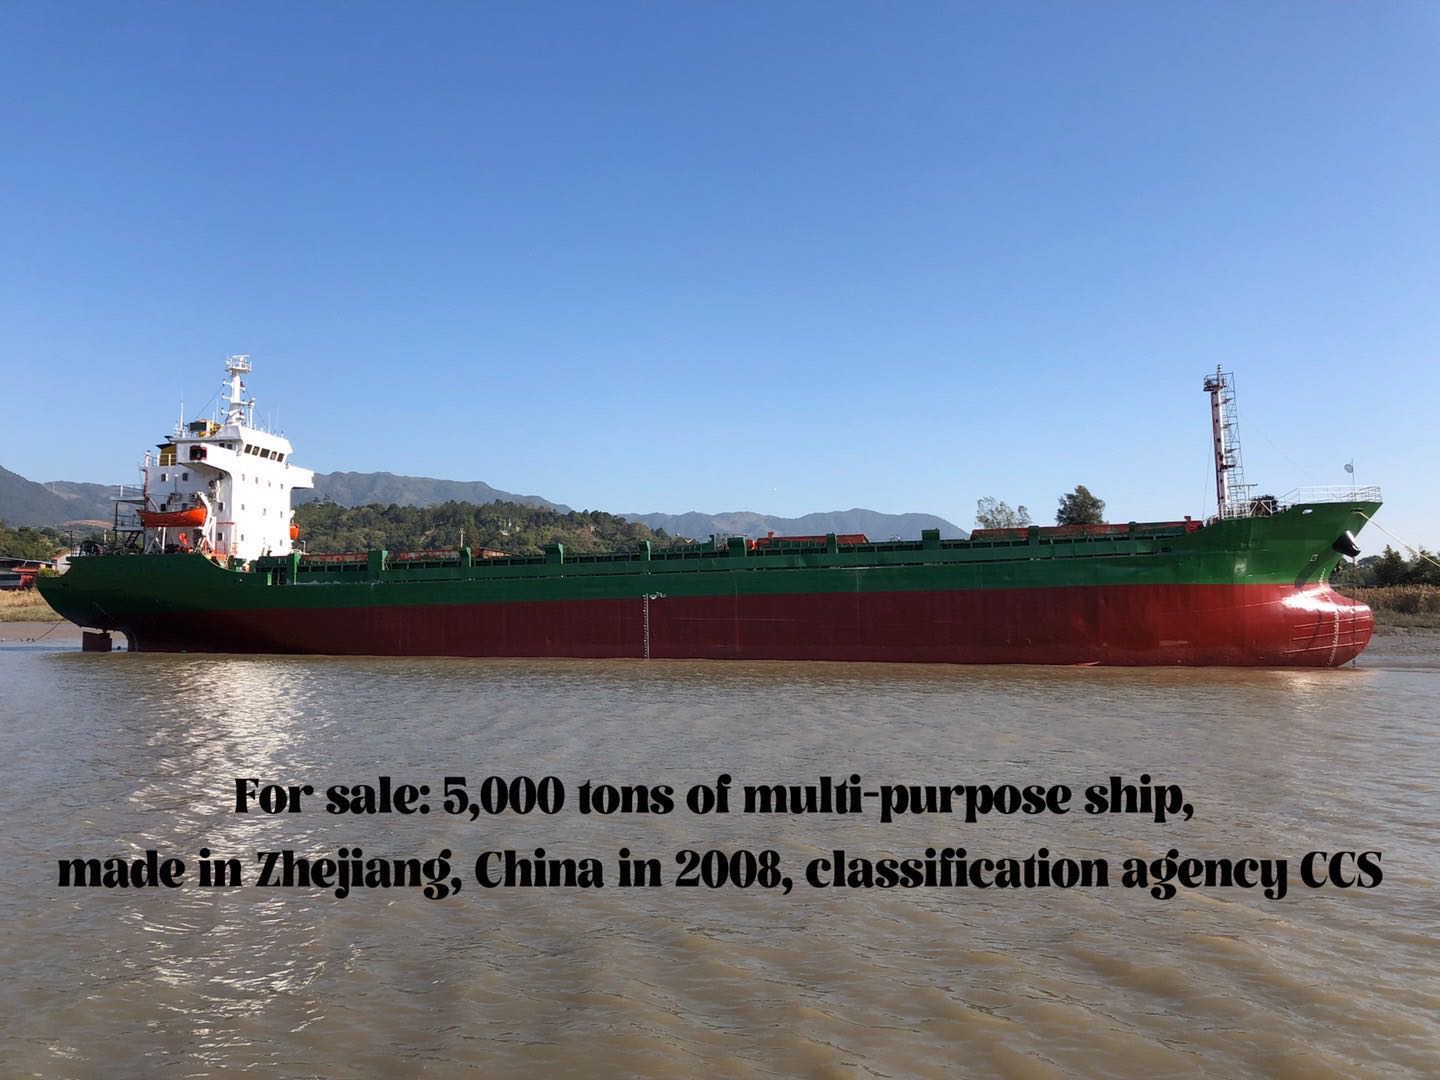 For sale: 5,000 tons of multi-purpose ship, made in Zhejiang, China in 2008, classification agency C